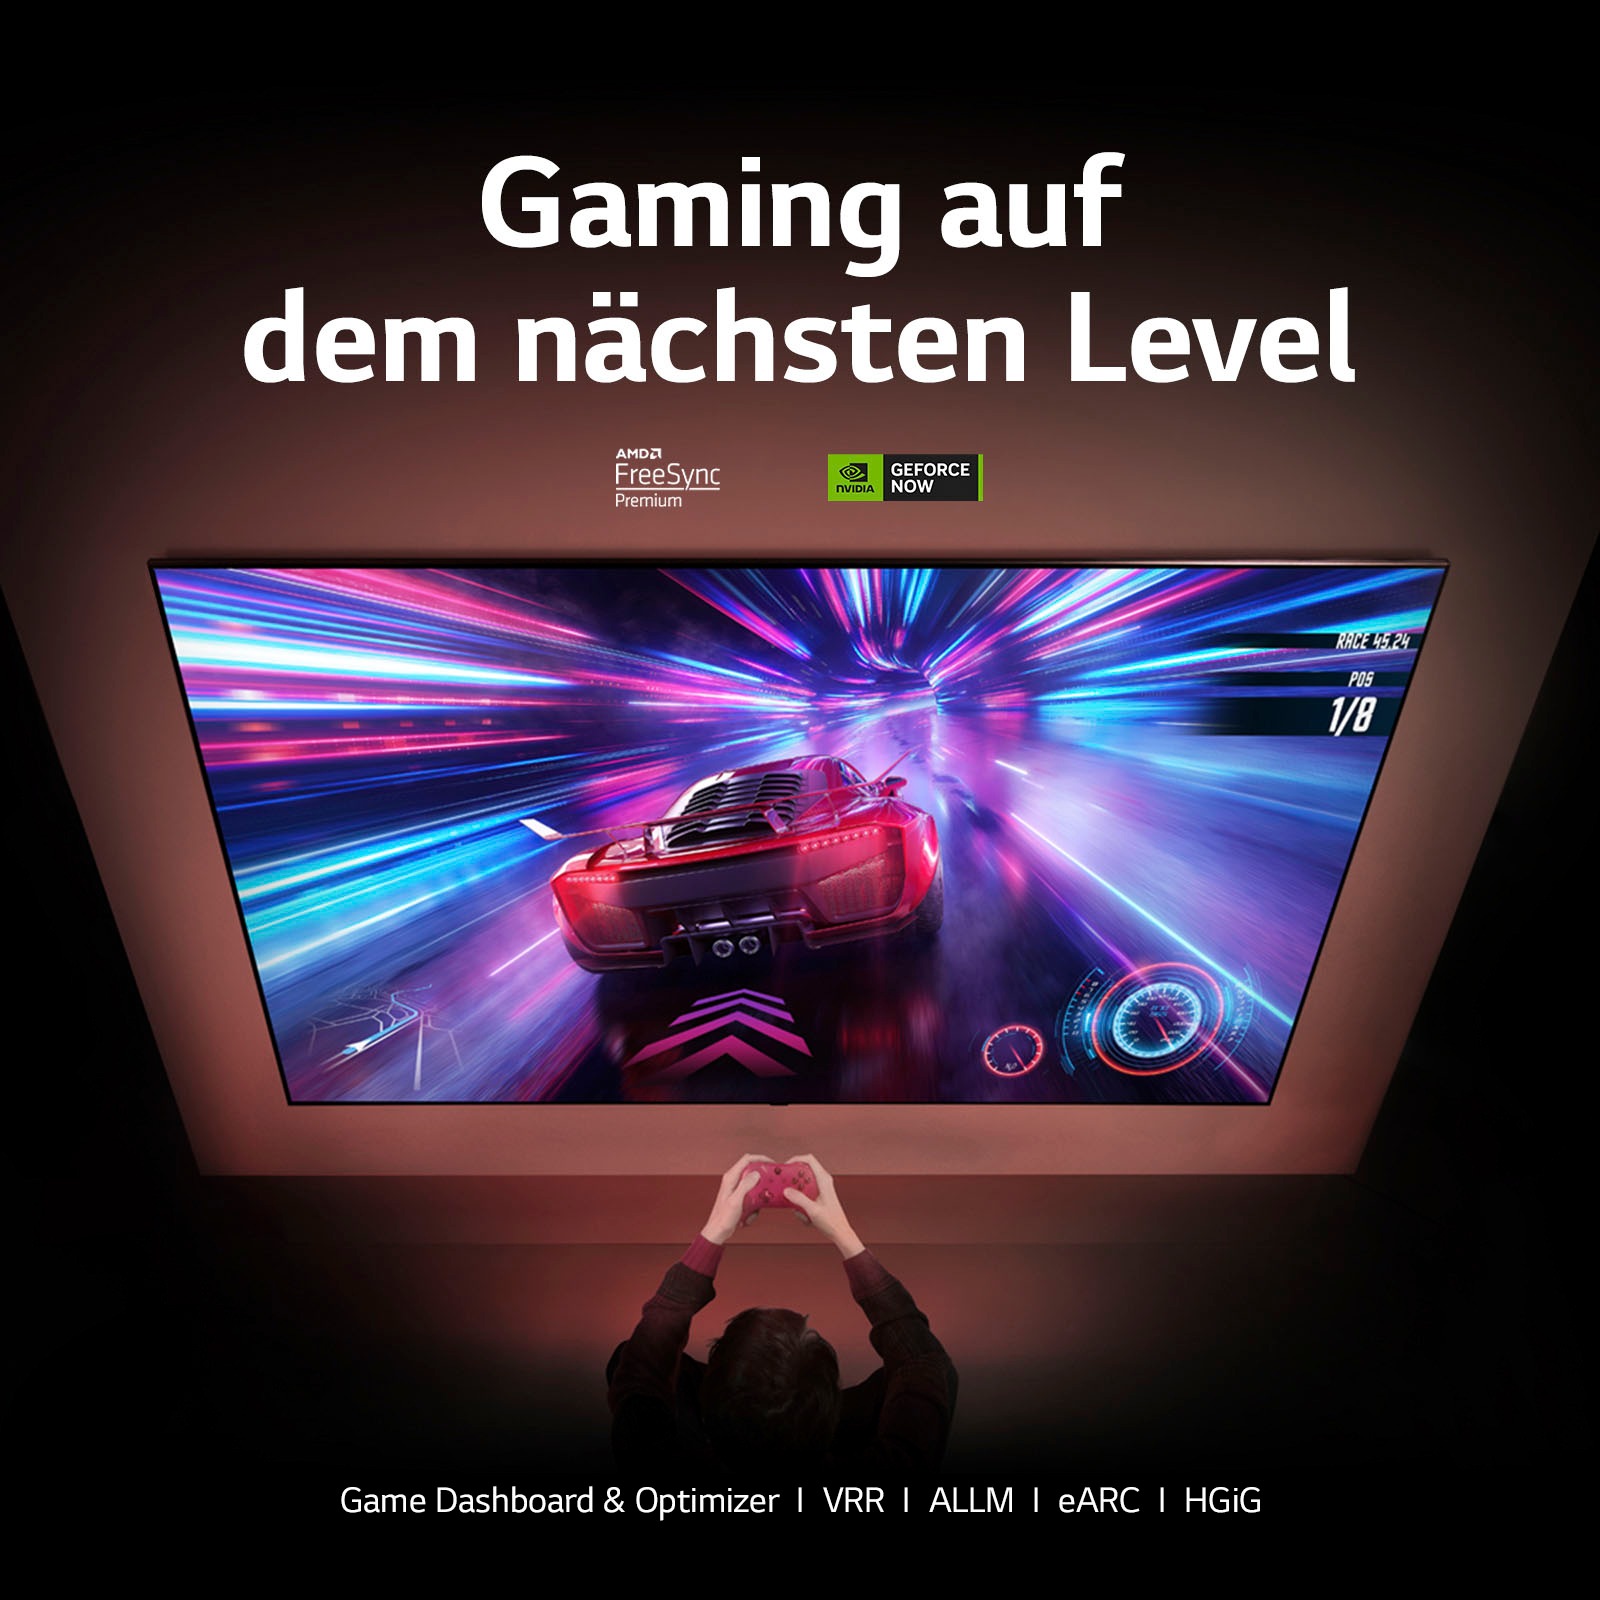 LG QNED-Fernseher »55QNED866RE«, 139 cm/55 Zoll, 4K Ultra HD, Smart-TV, QNED MiniLED,bis zu 120Hz,α7 Gen6 4K AI-Prozessor,Dolby Vision & Atmos